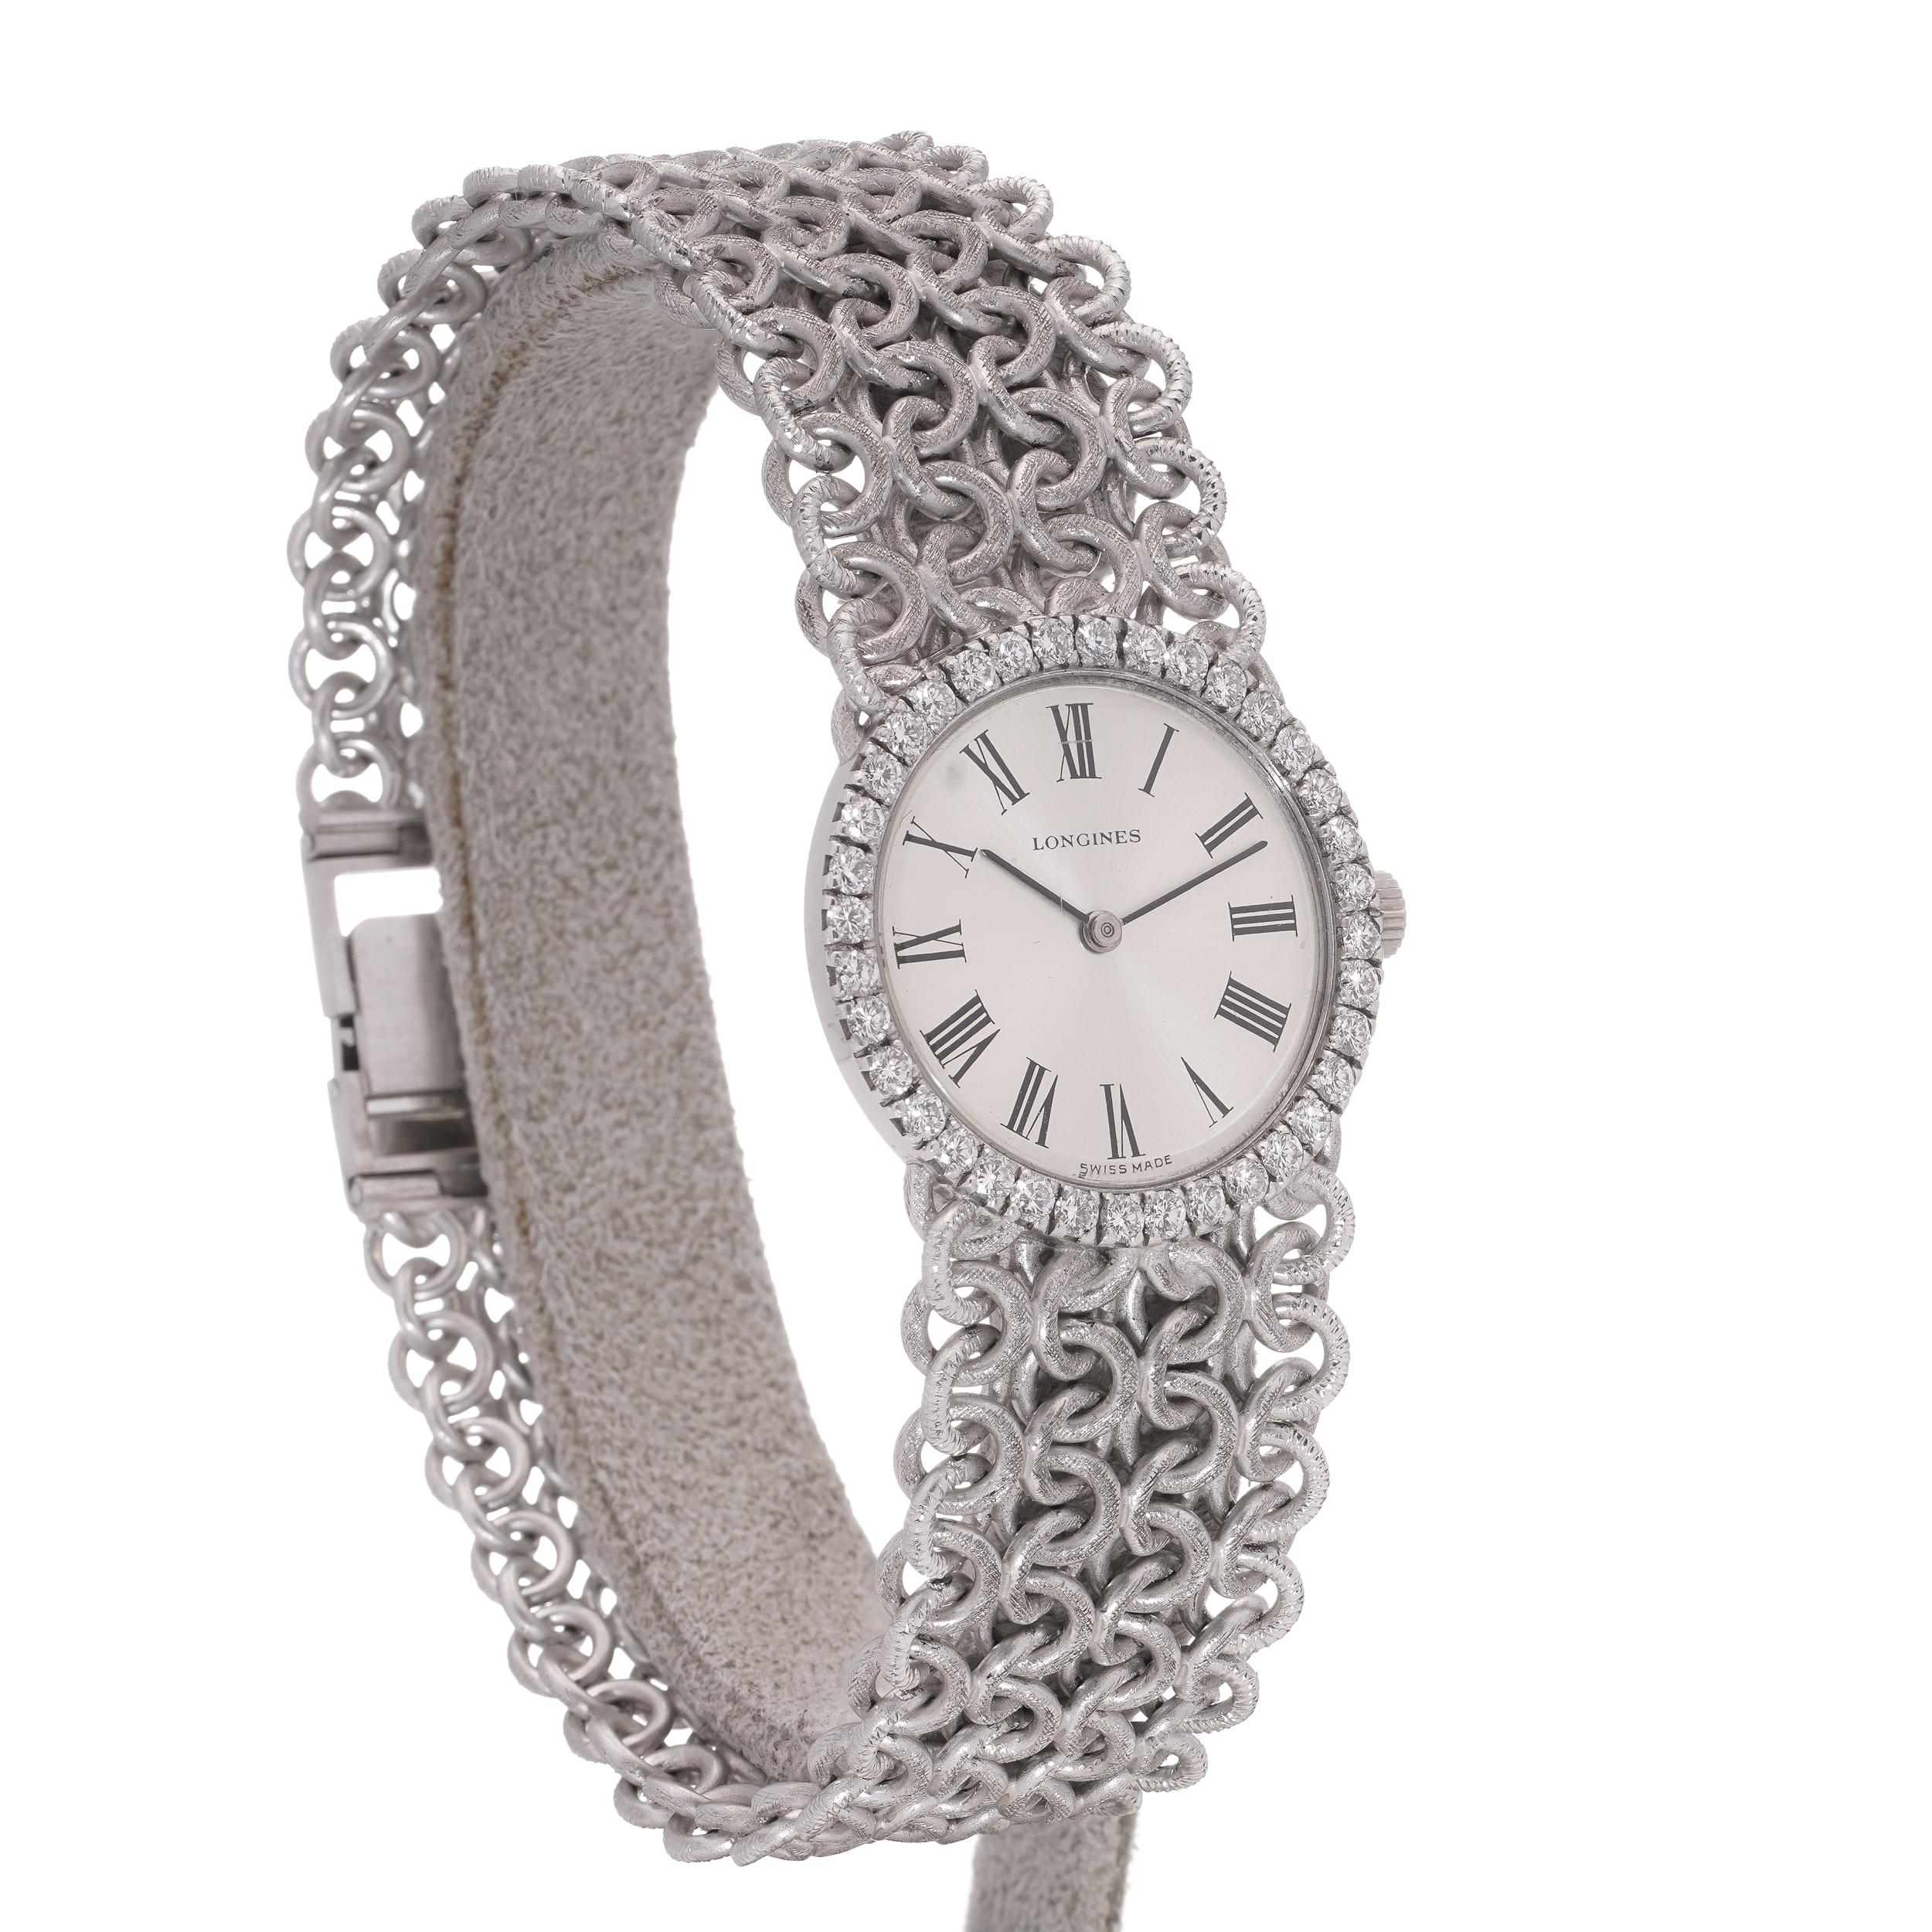 Longines 18kt. white gold ladies' wristwatch with diamond-set bezel In Good Condition For Sale In Braintree, GB